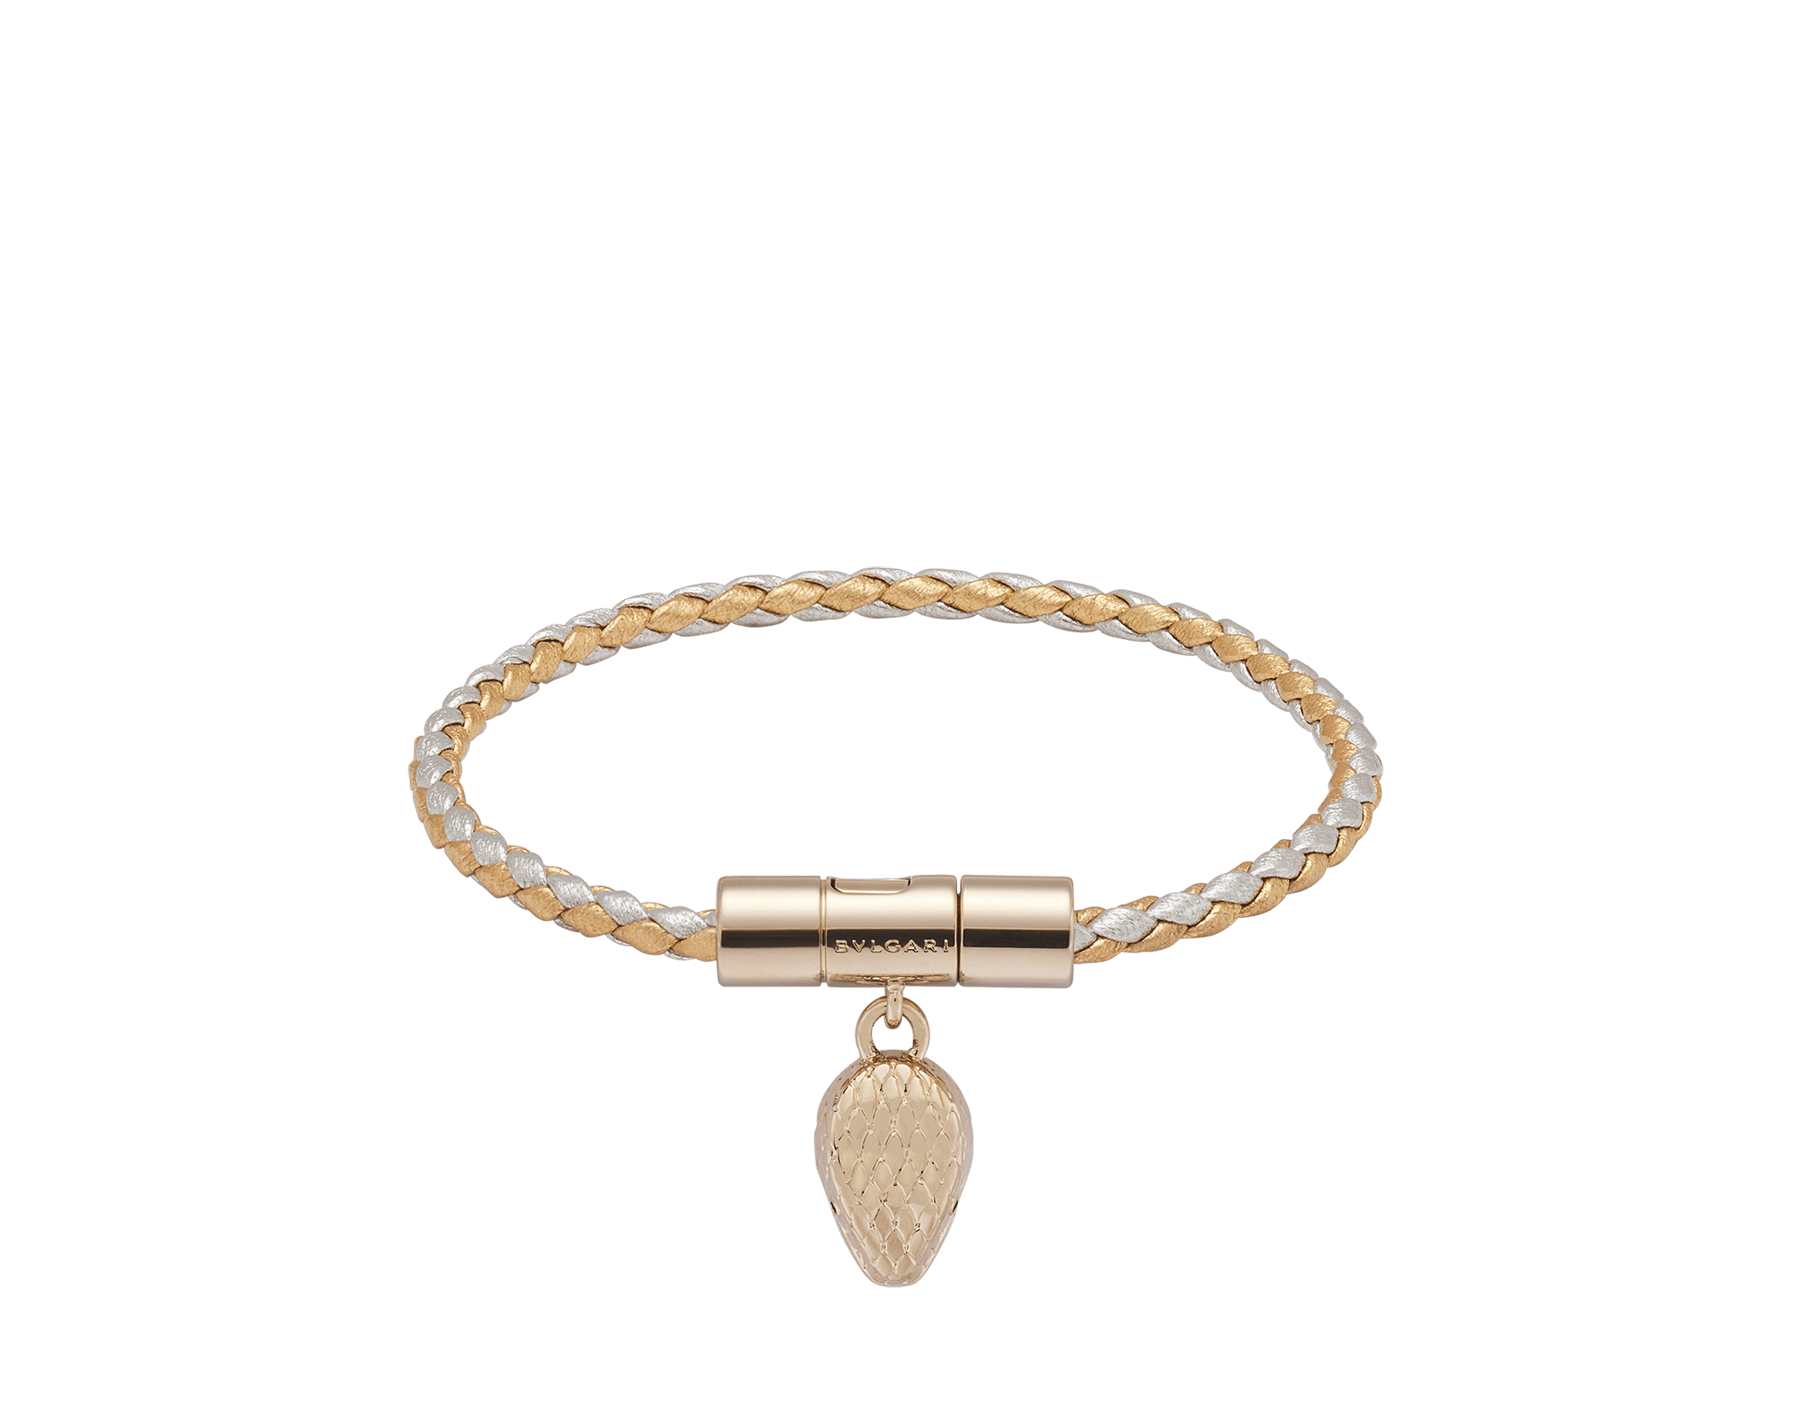 Serpenti Forever bracelet in gold and silver braided calf leather. Captivating light gold-plated brass snakehead charm embellished with red enamel eyes, attached to the front clasp. SERPHERBRAID-WCL-GS image 1